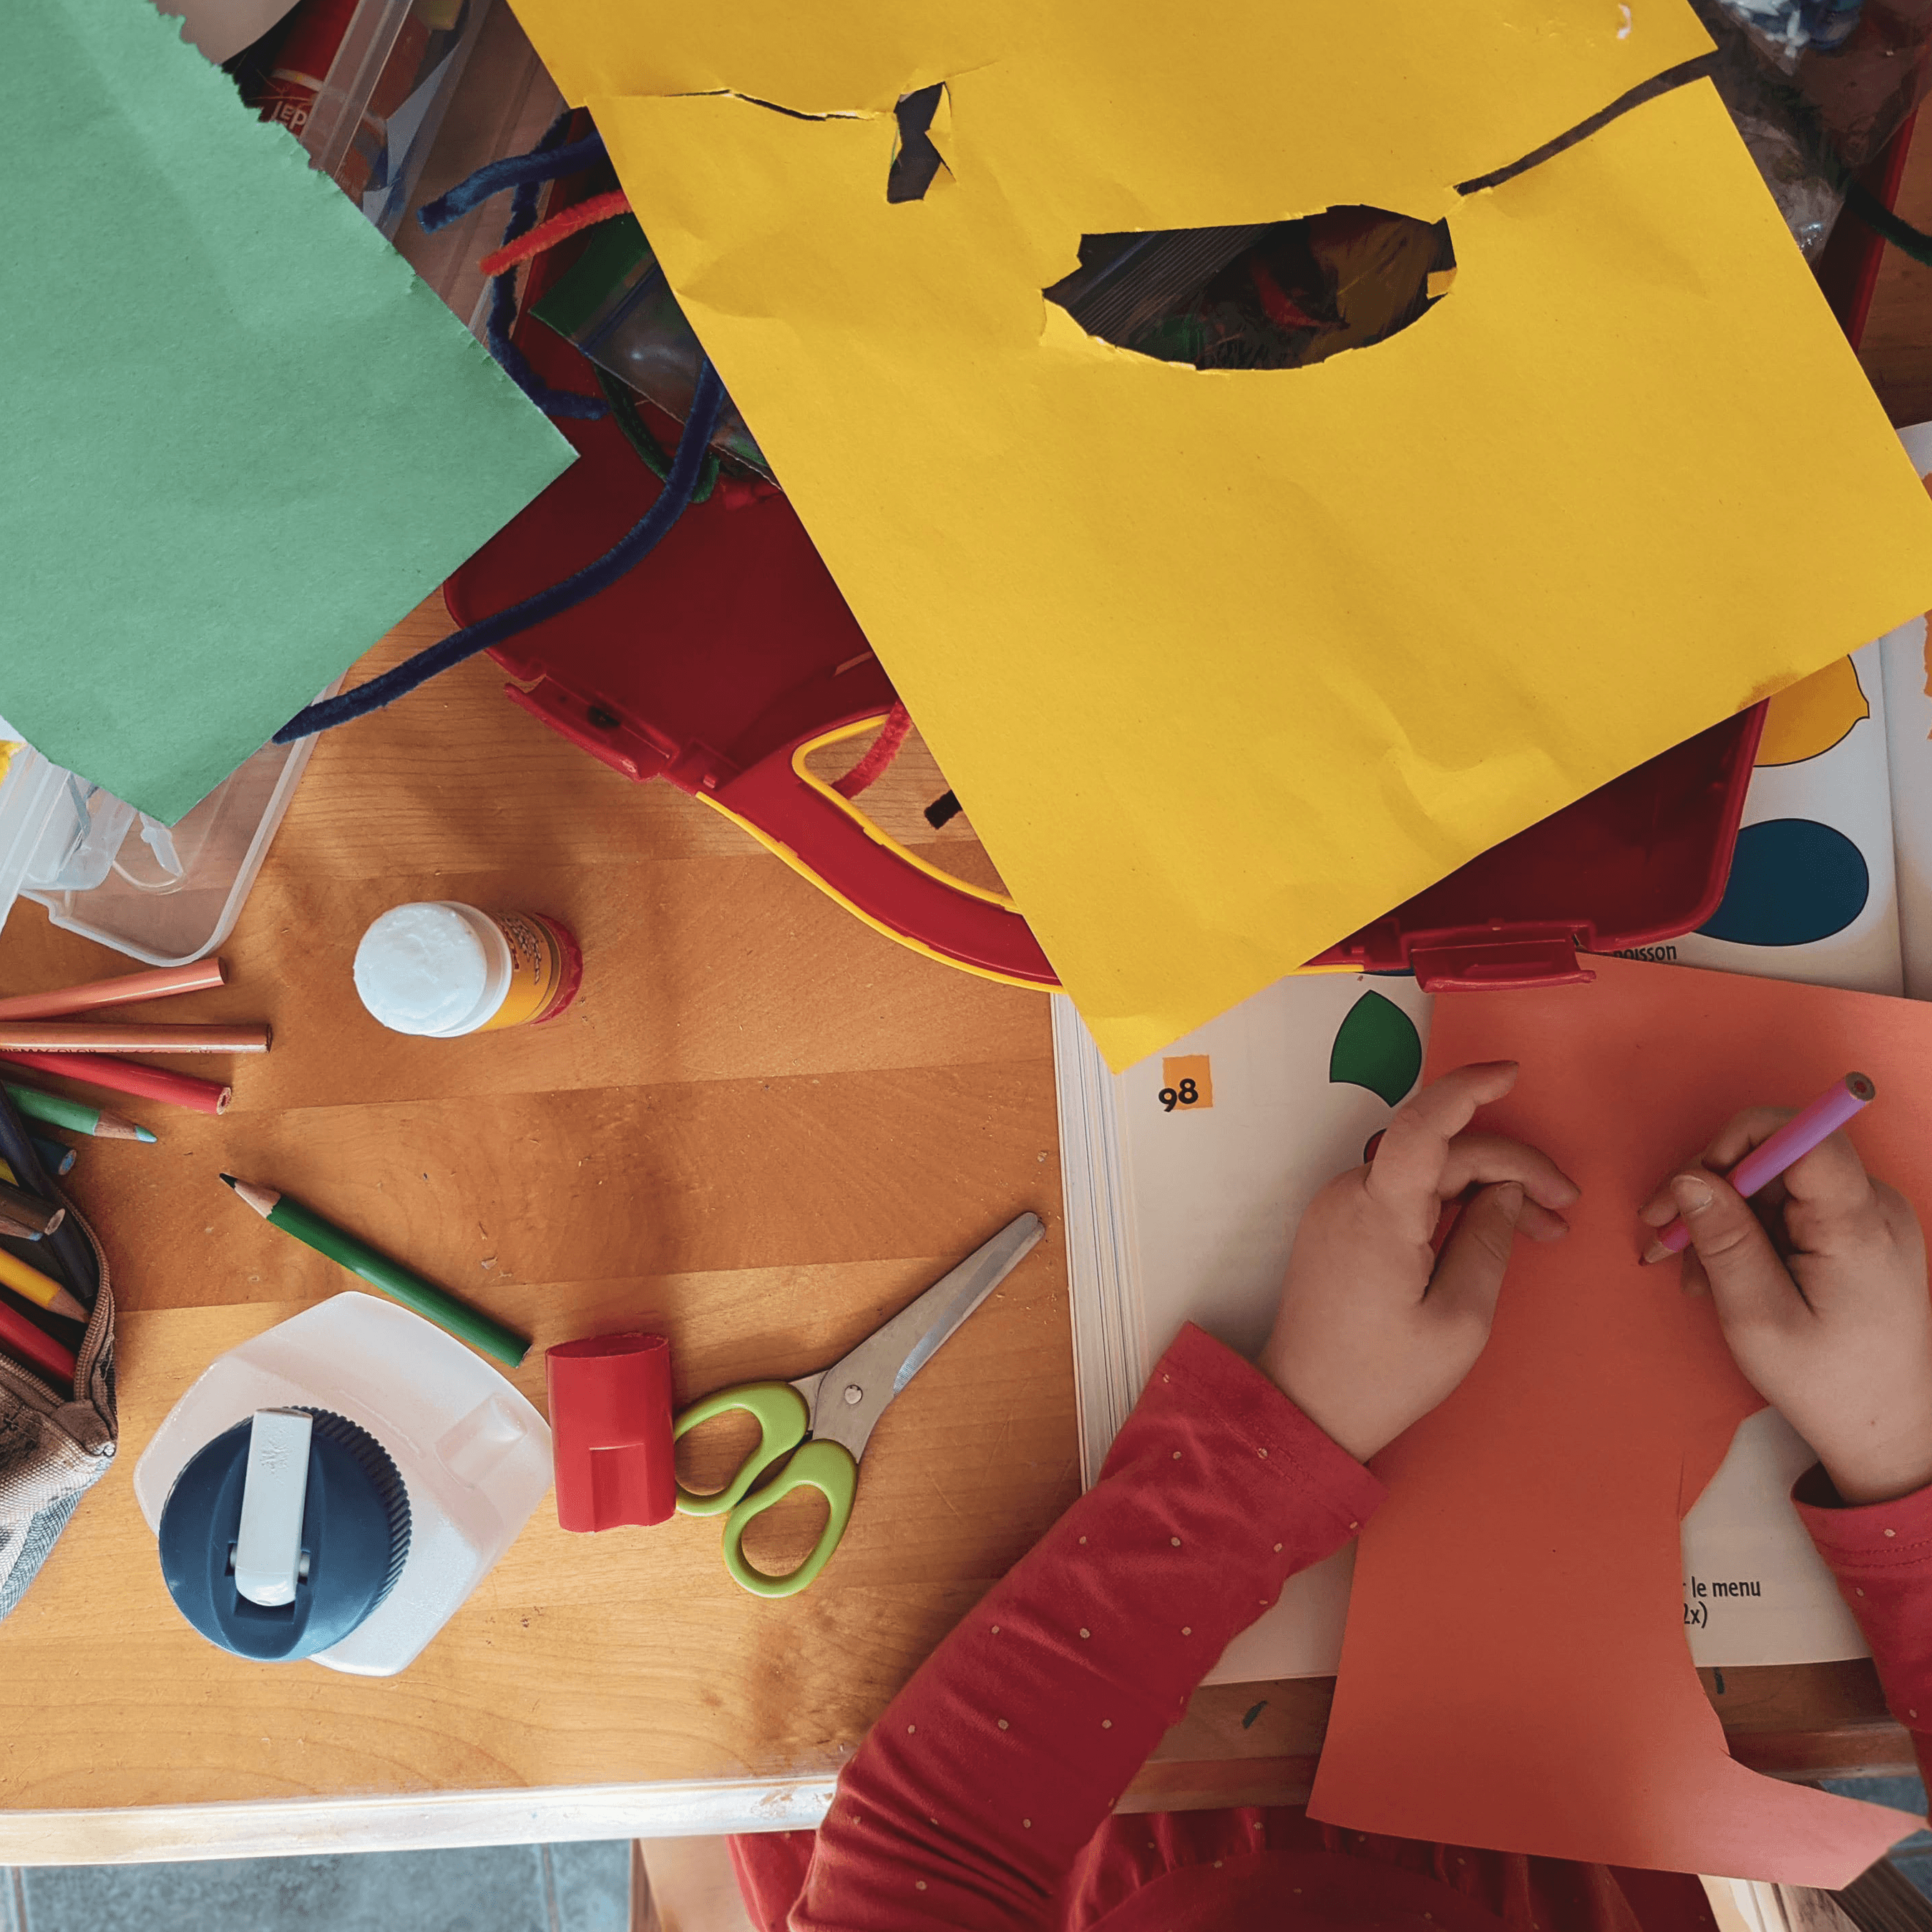 The CUTEST Cardboard Box Crafts for Kids - Messy Little Monster